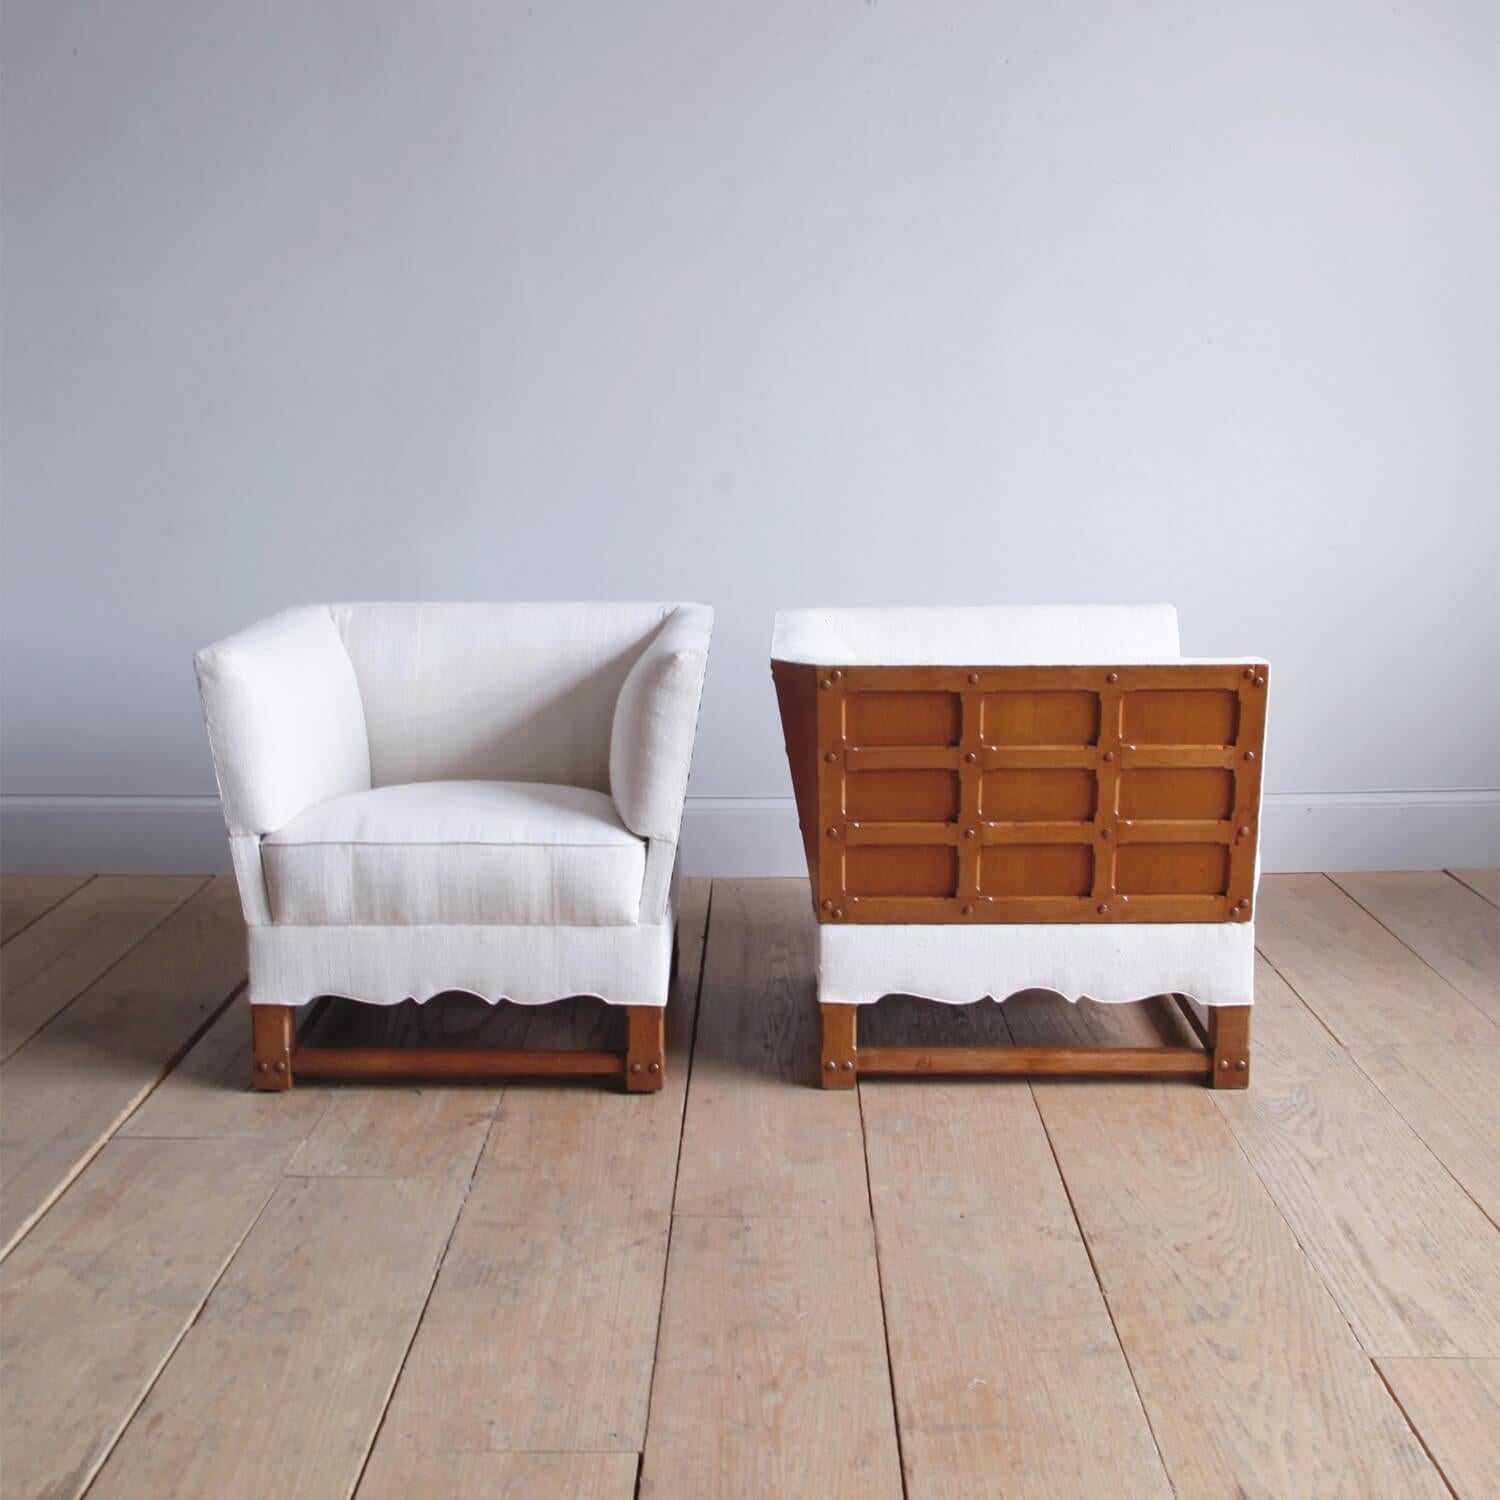 Elias Barup was the first furniture designer for Gärsnäs AB in Sweden. This would have been one of his first designs for them, in the 1930s. Upholstered in a gorgeous vintage hemp linen.

      